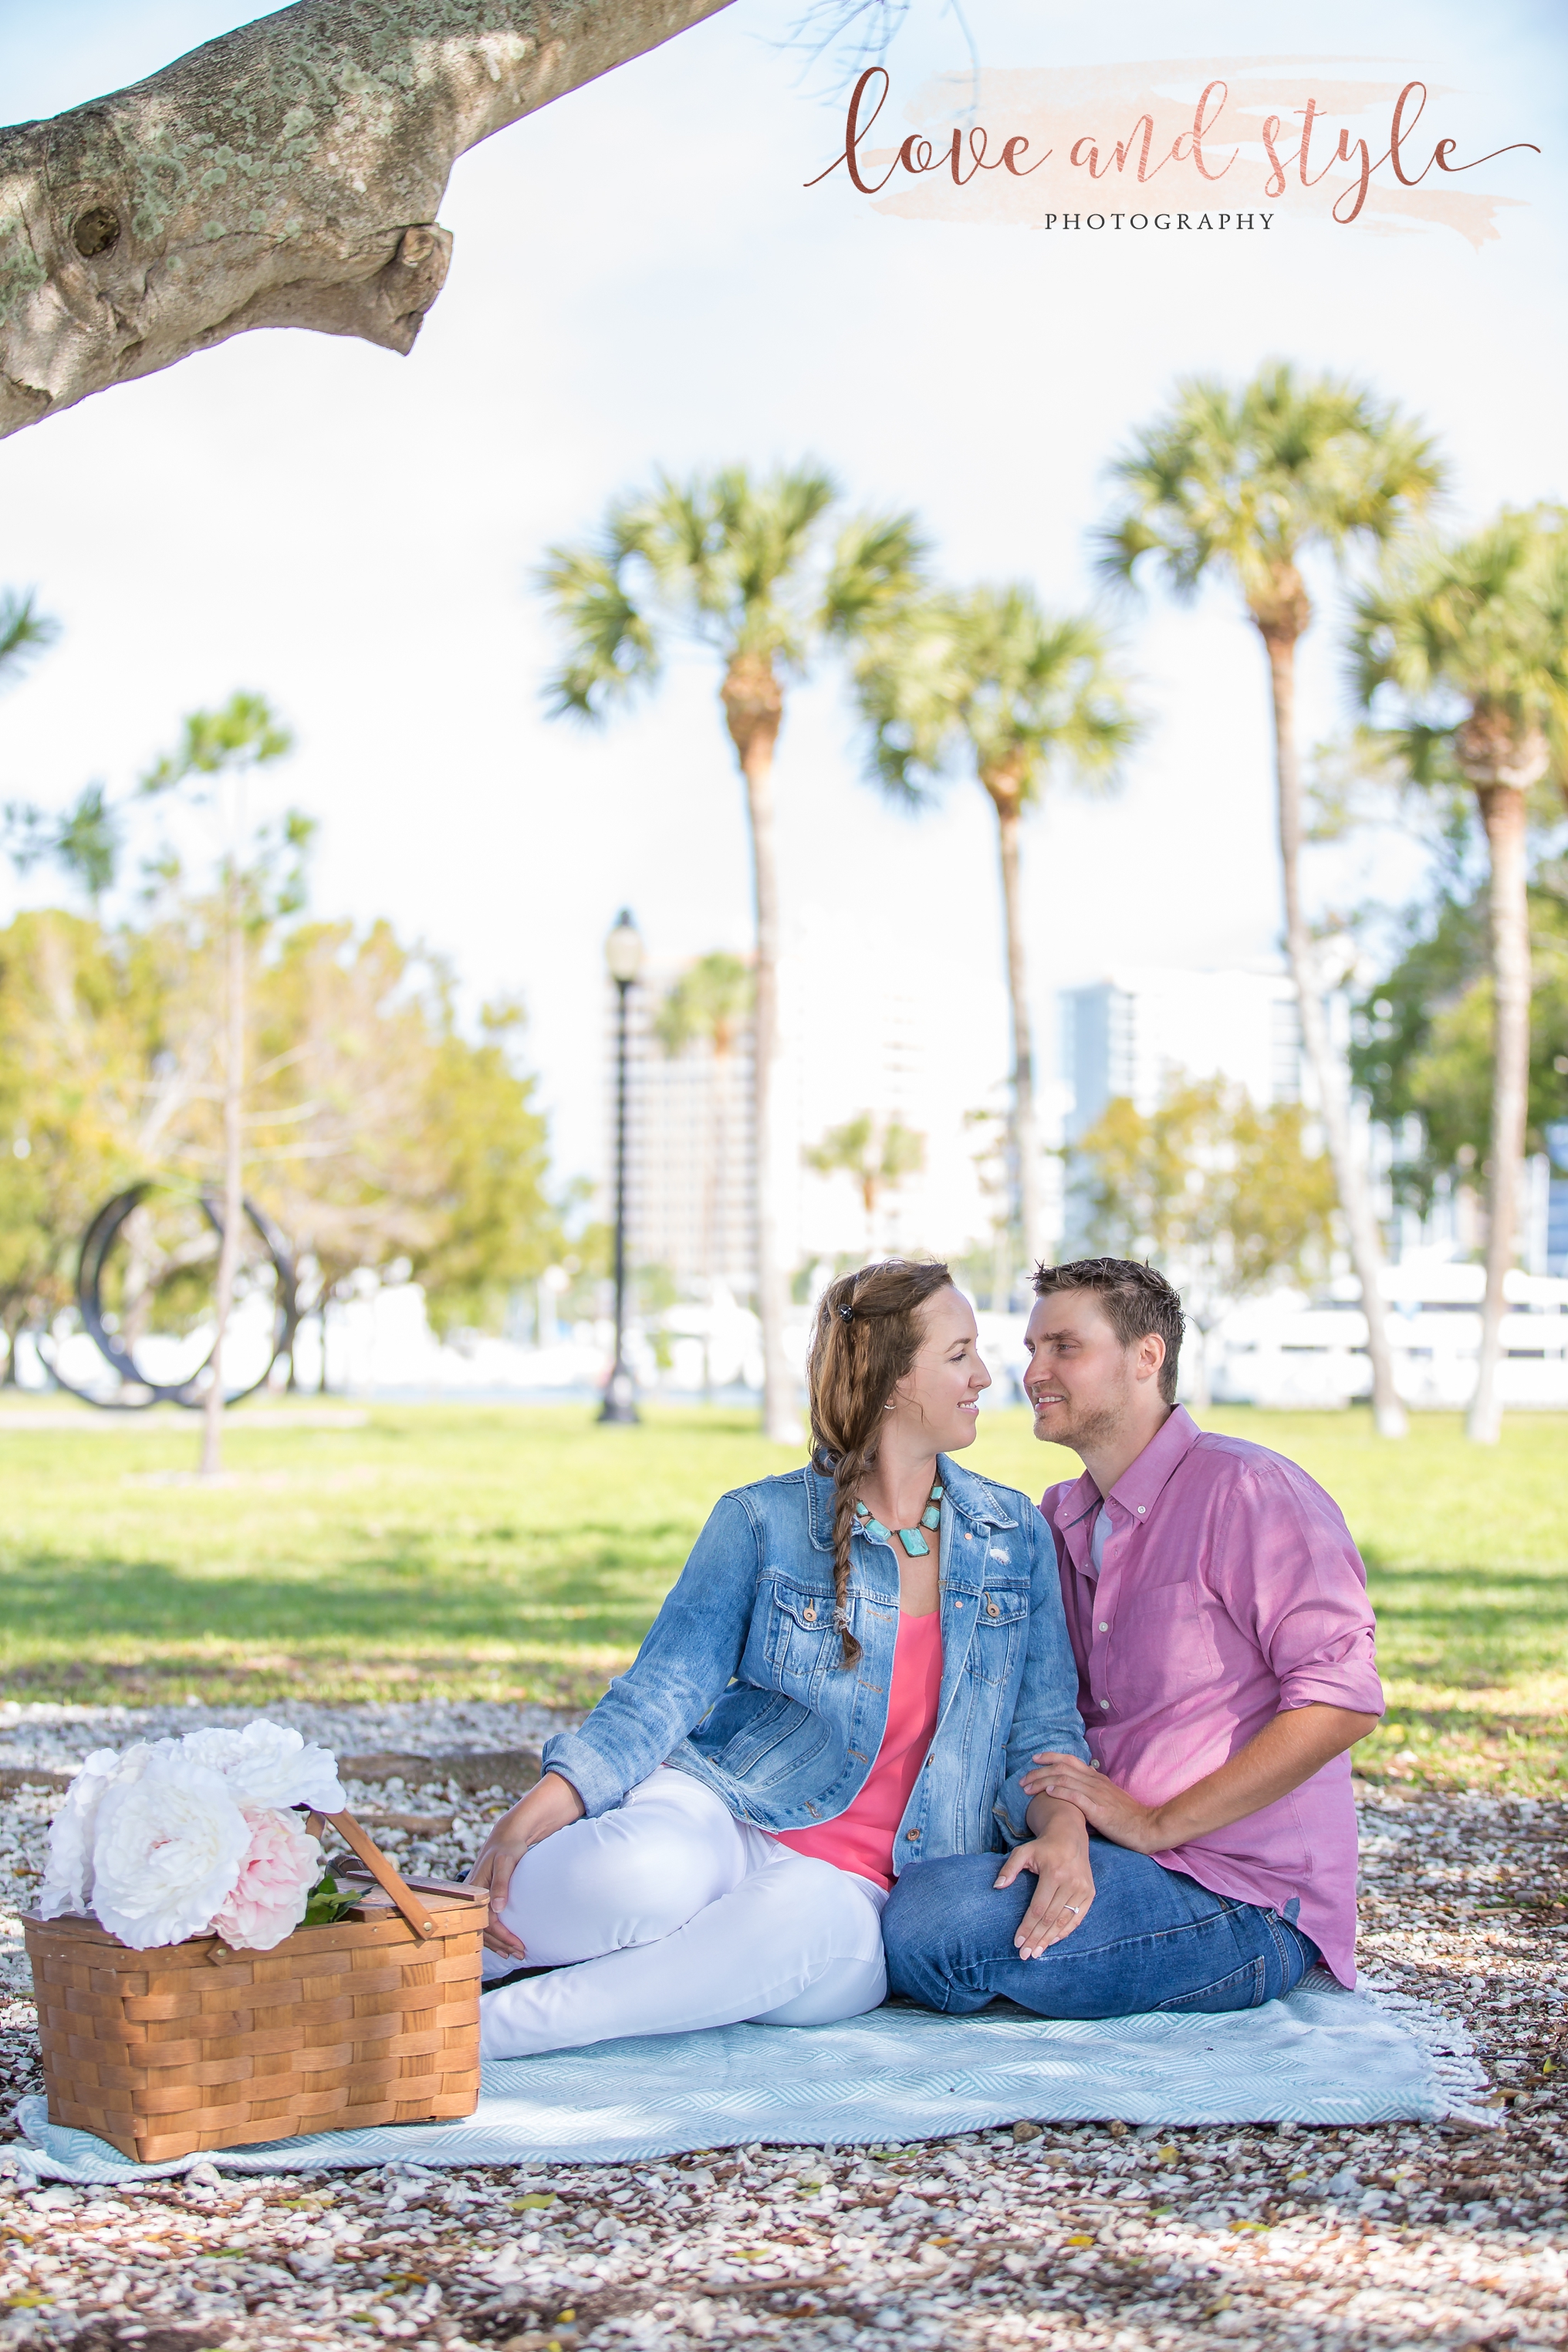 Sarasota Engagement Photography at Bayfront Park in the morning with the couple having a picnic